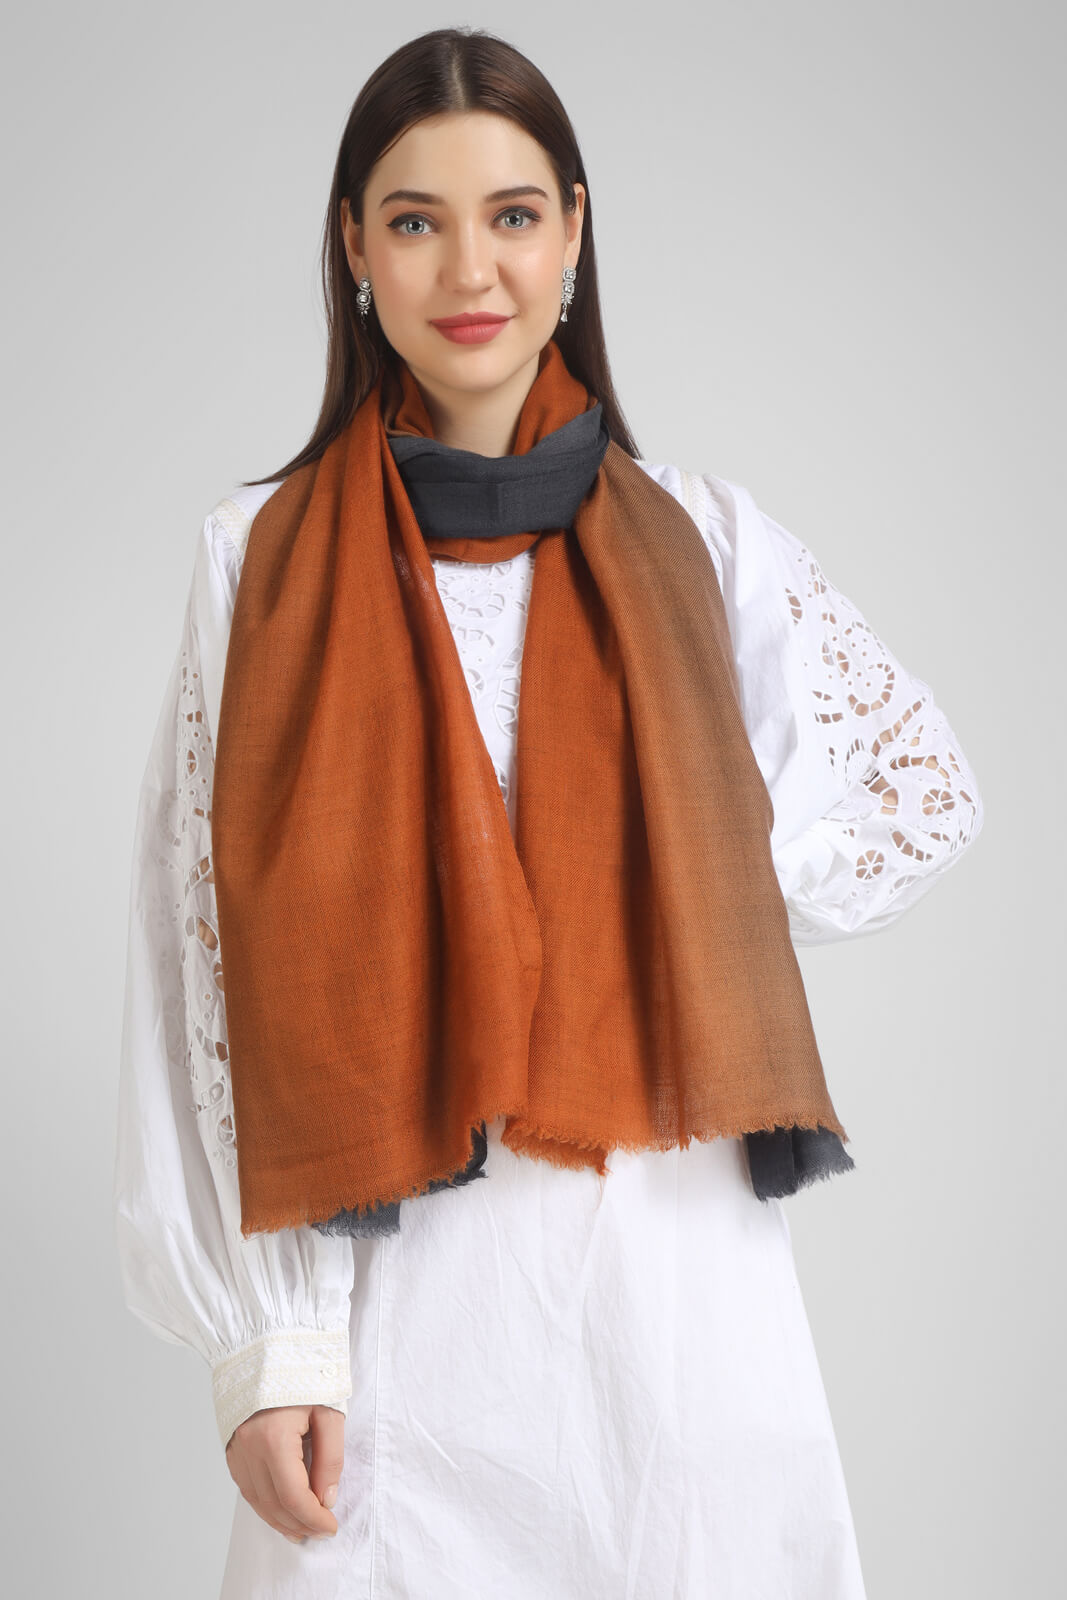 pashmina stoles Rust & Grey Ombre Pashmina Stole – a fusion of warm tones and cool grays.- We deliver our premium Pashmina products to the United Kingdom, Germany, France, Japan, UAE, and Australia. Elevate your style with ease – order now!"